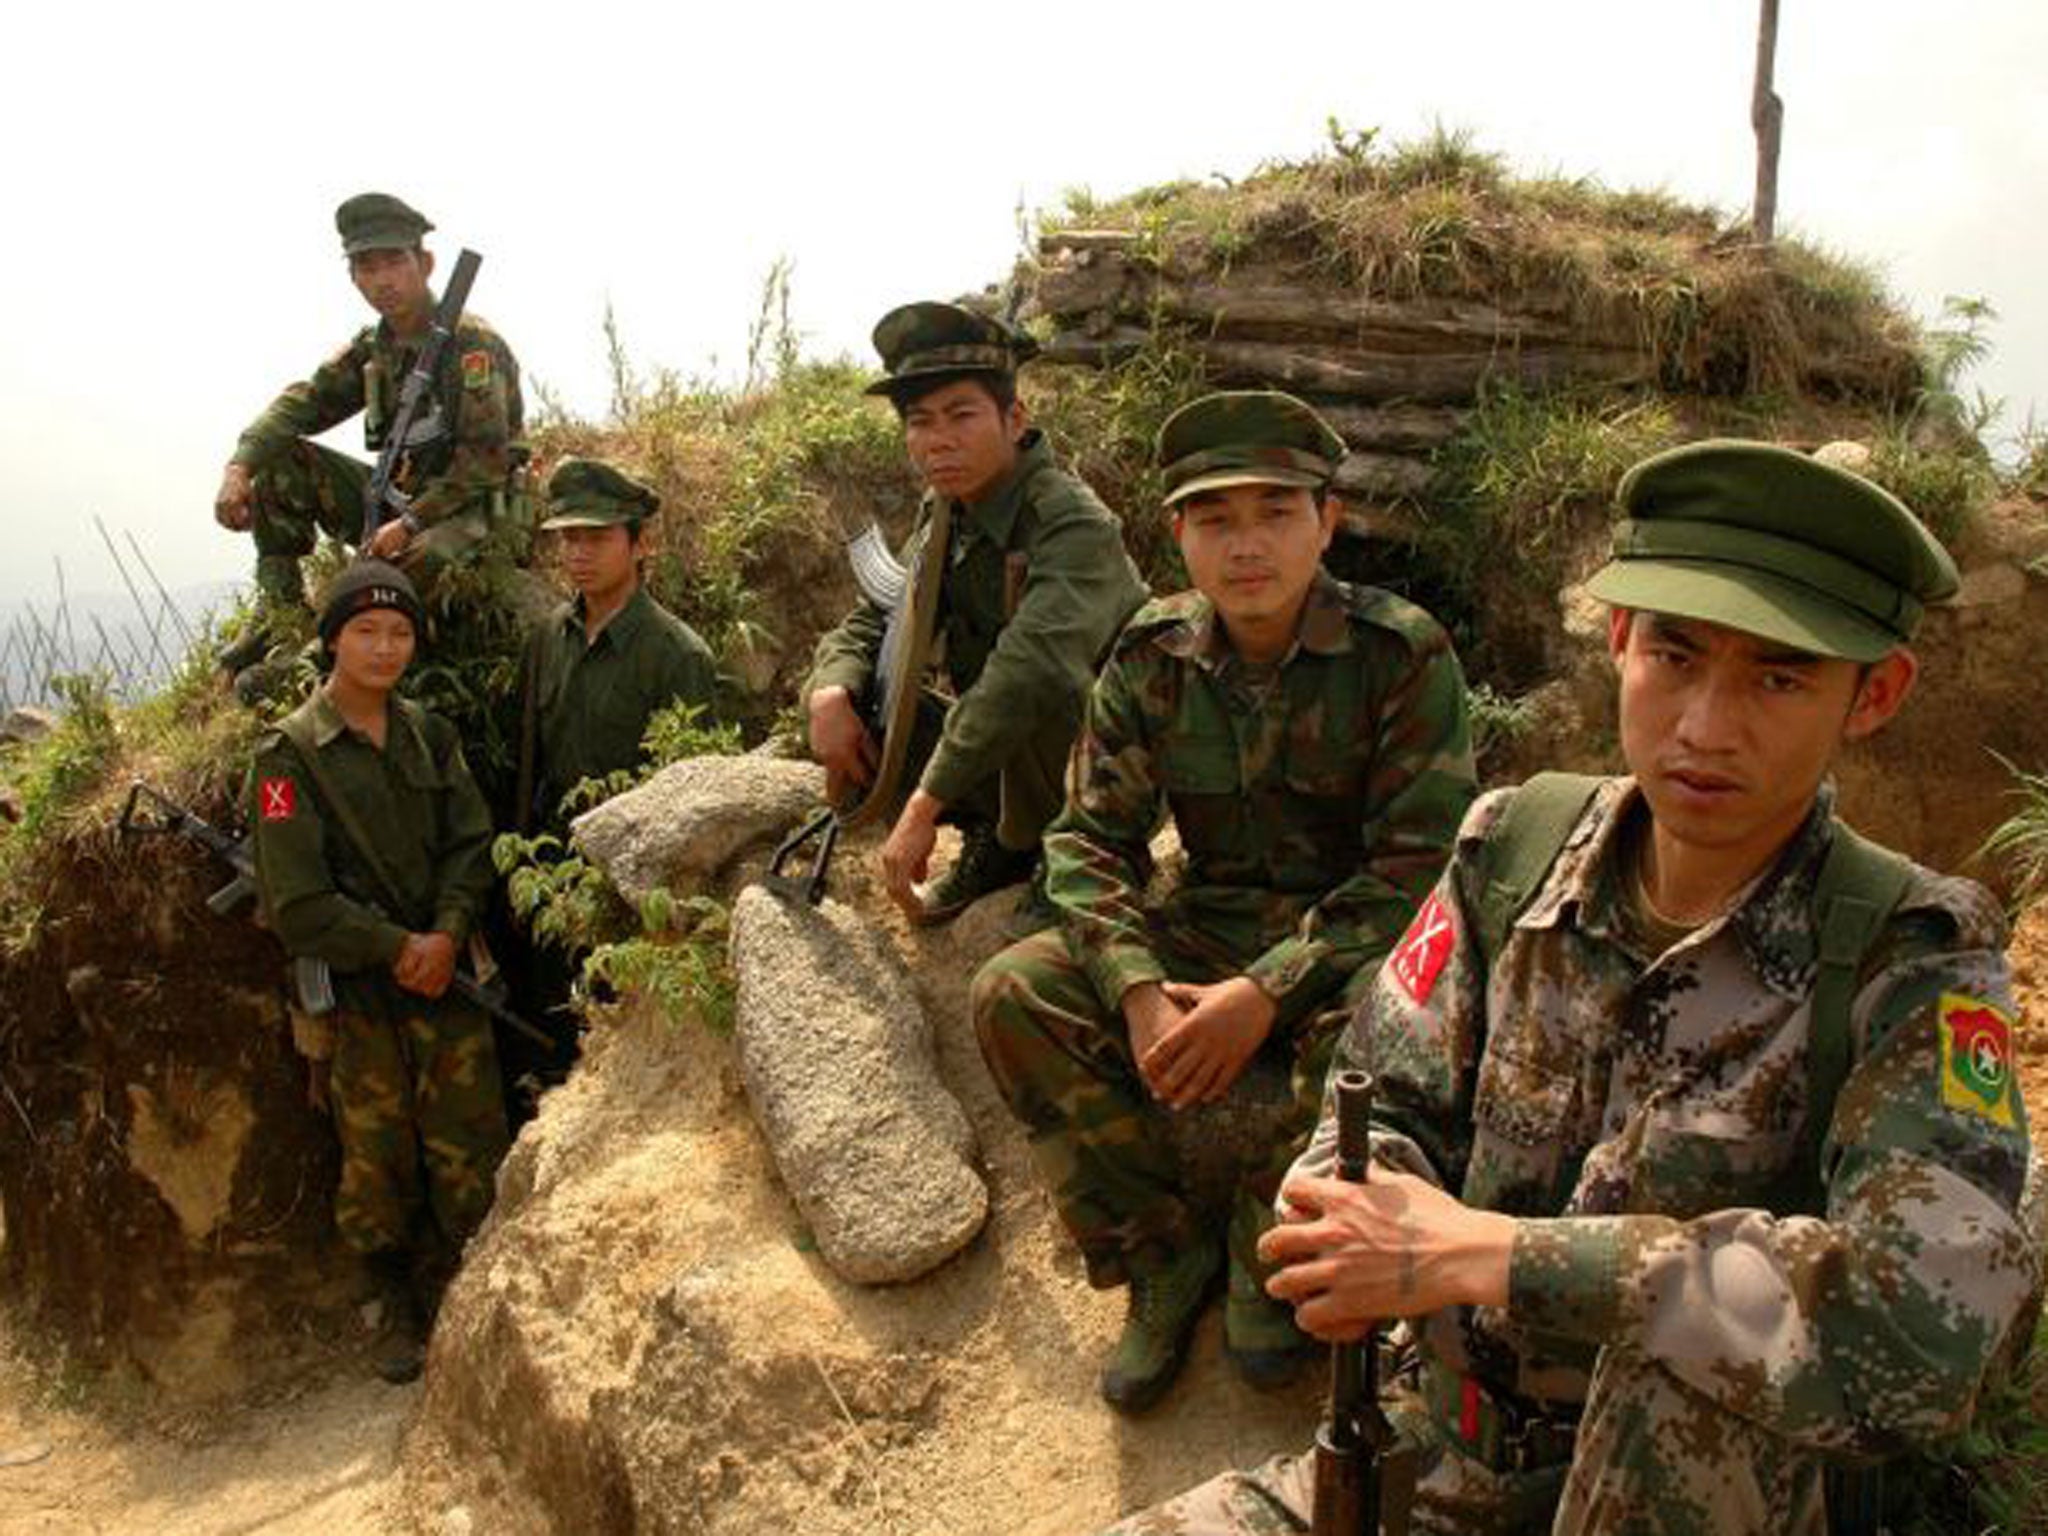 Kachin rebels in north-east Burma, against whom the arms were used